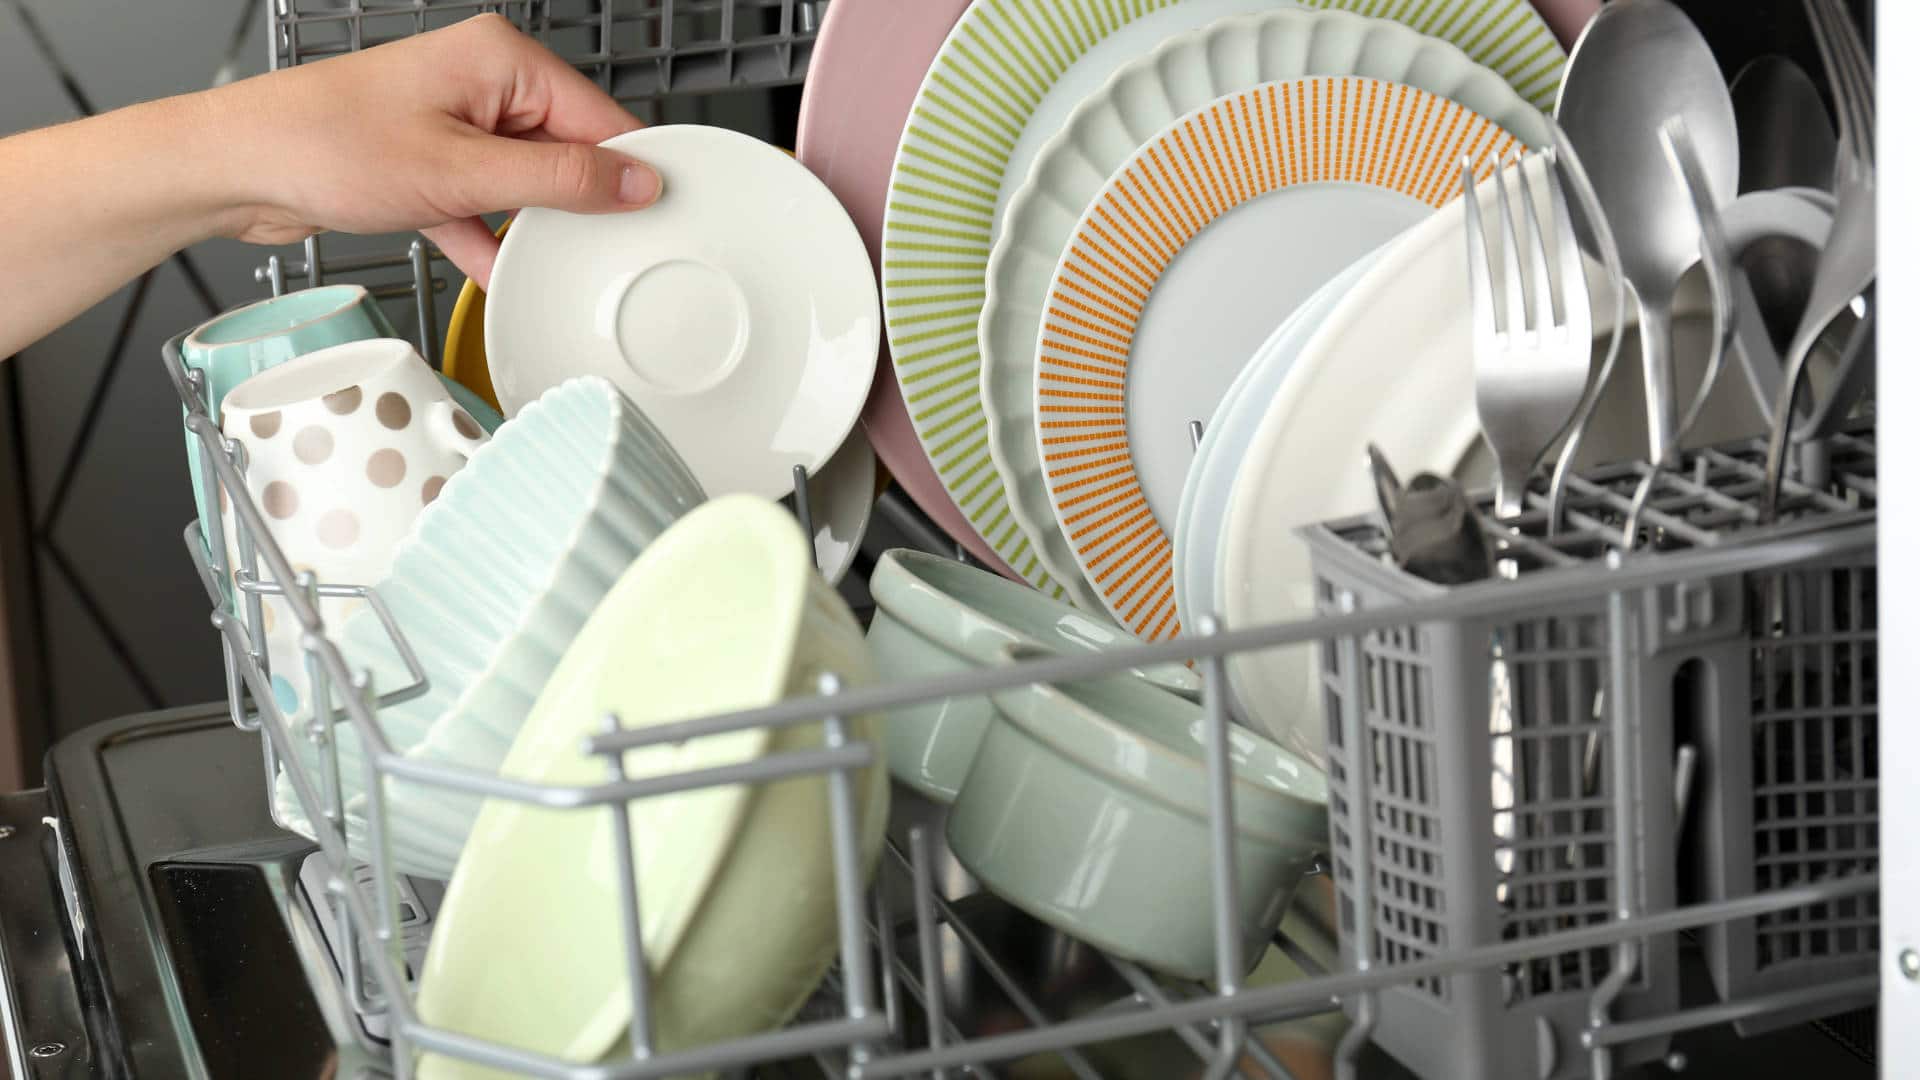 3 Signs You May Need to Repair Your Dishwasher